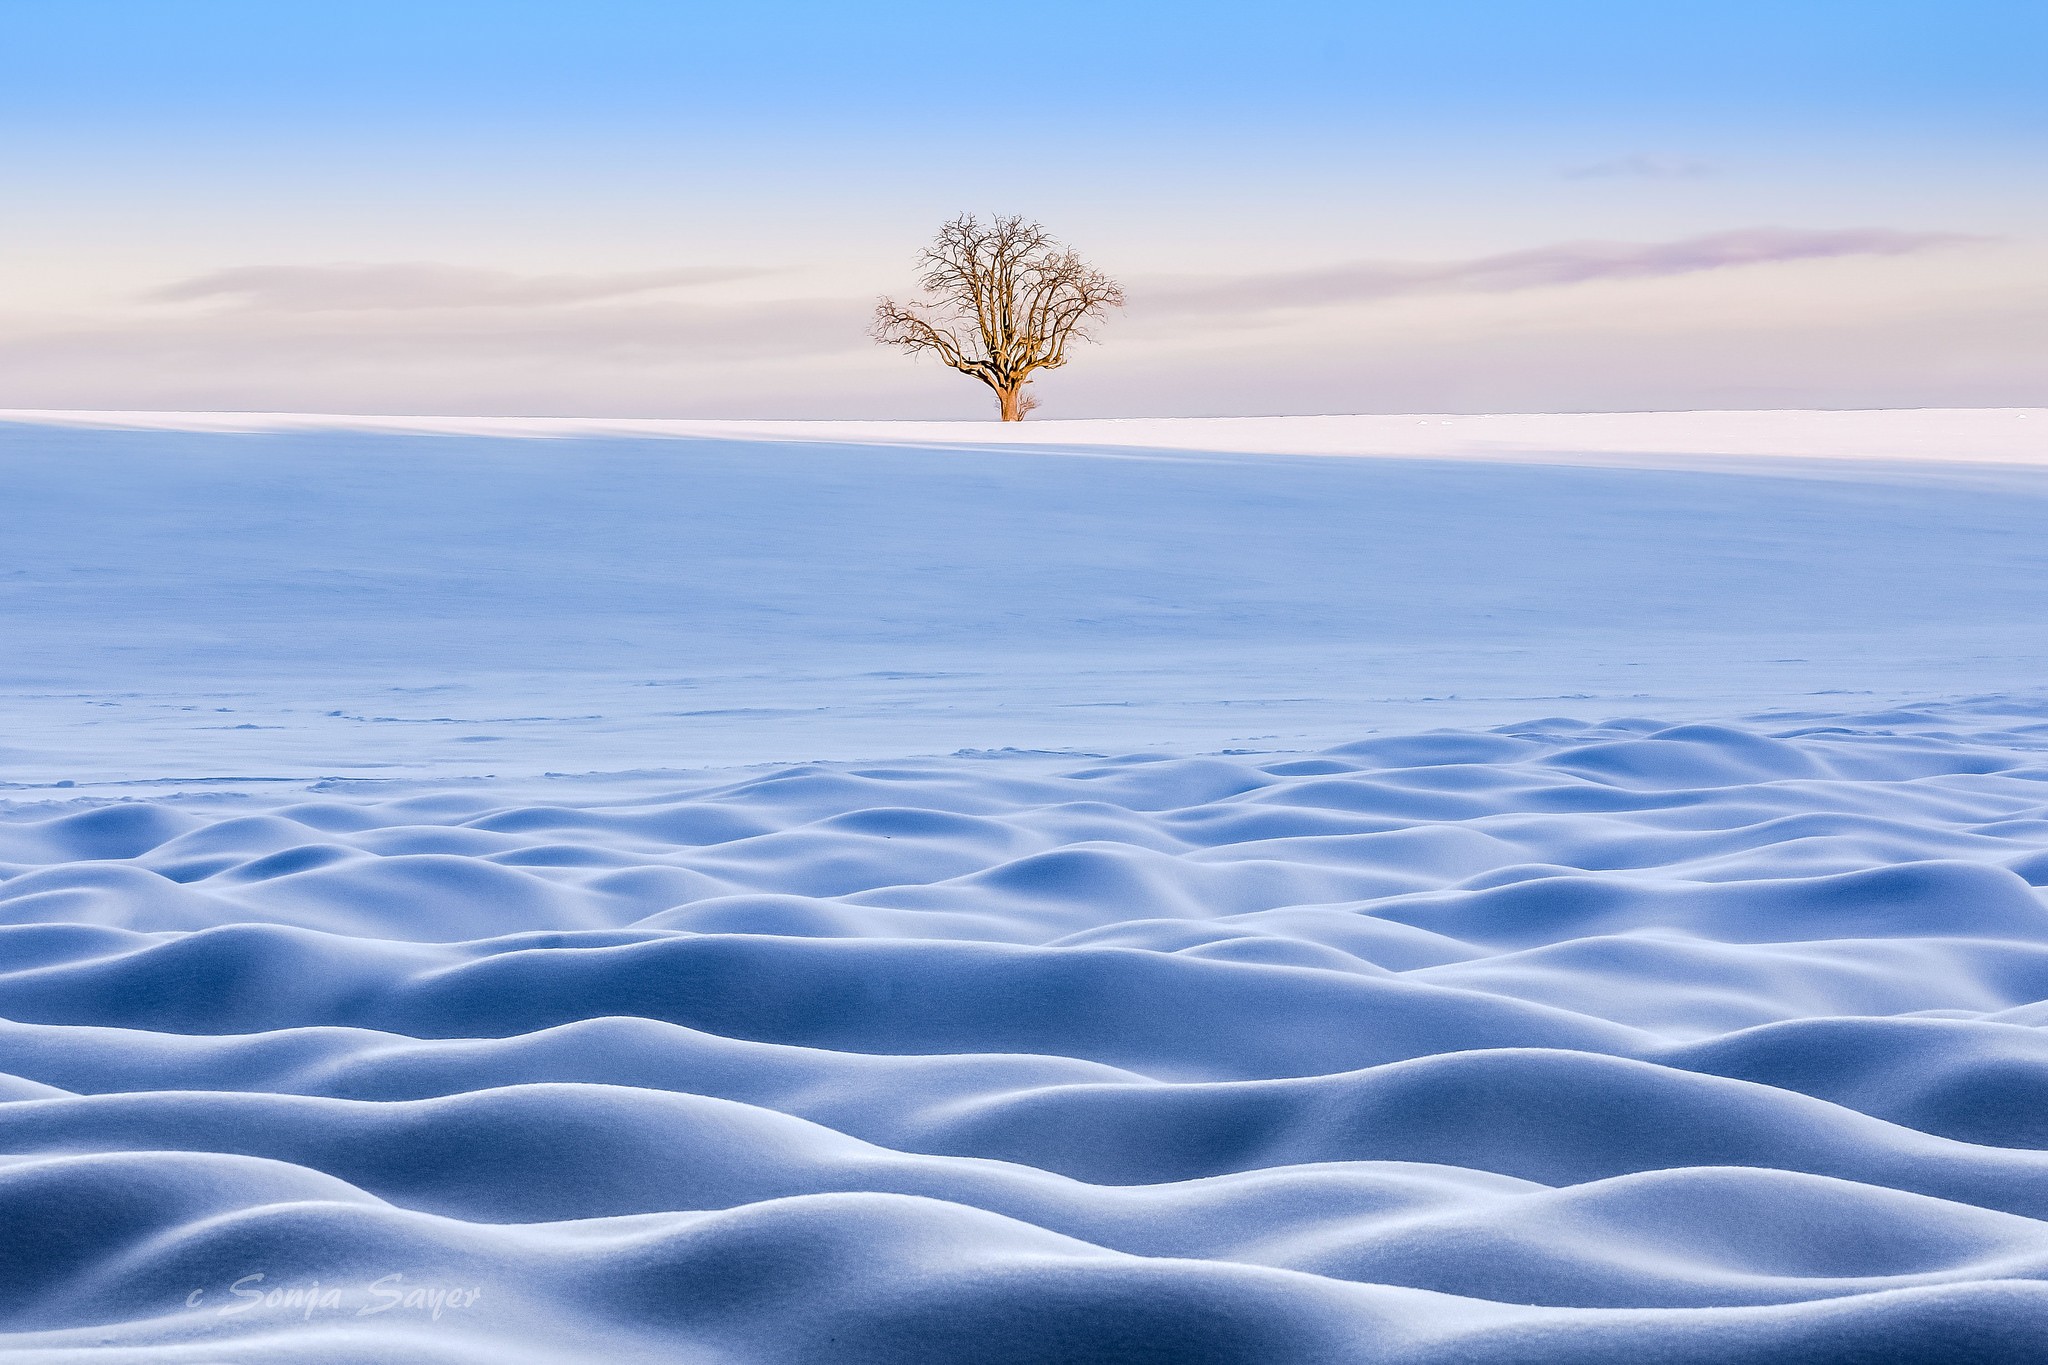 General 2048x1365 winter snow landscape trees cold ice frost outdoors nature